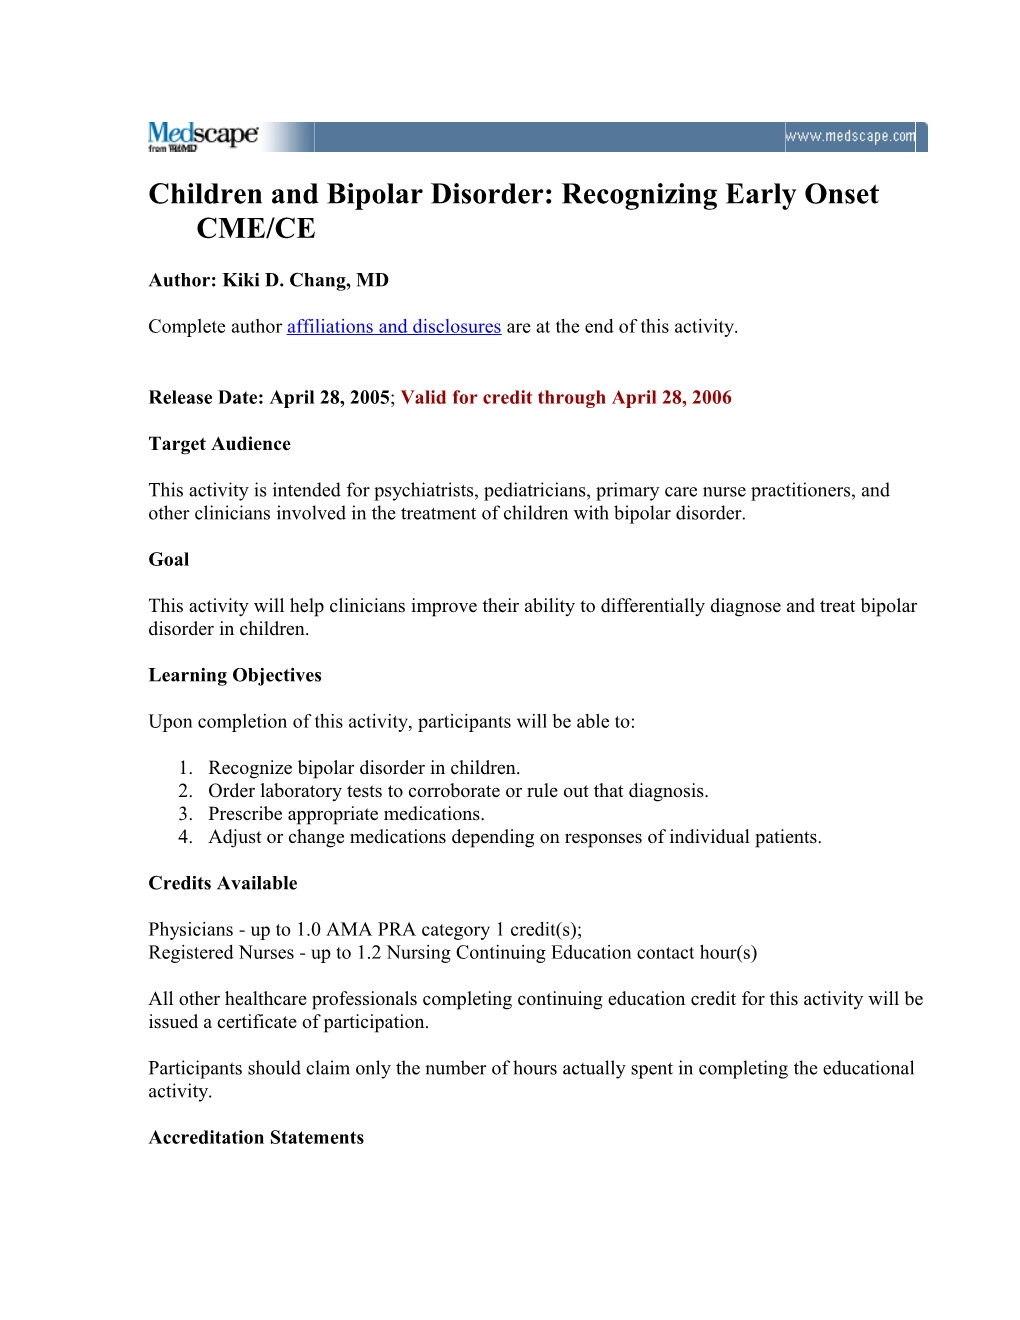 Children and Bipolar Disorder: Recognizing Early Onset CME/CE